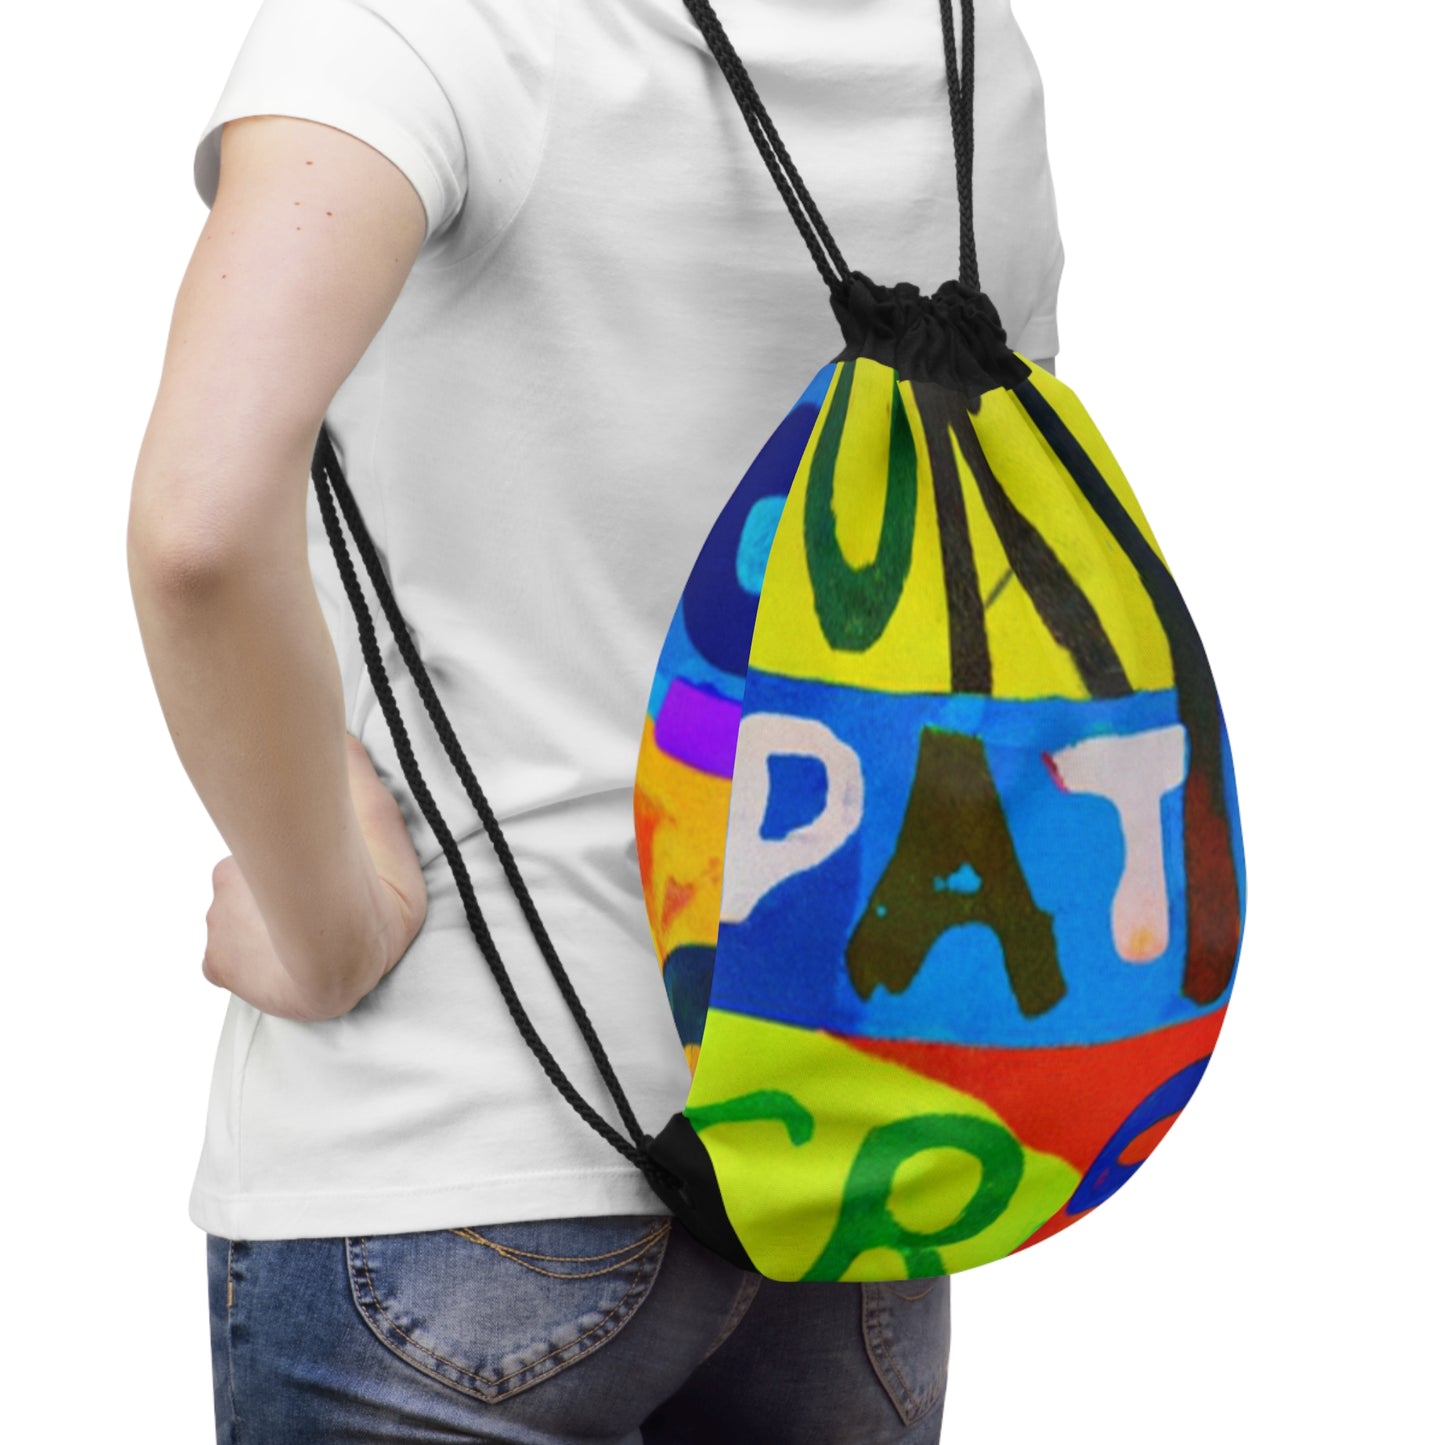 "Teamwork in Color: A Sports-Themed Mixed-Media Artwork" - Go Plus Drawstring Bag